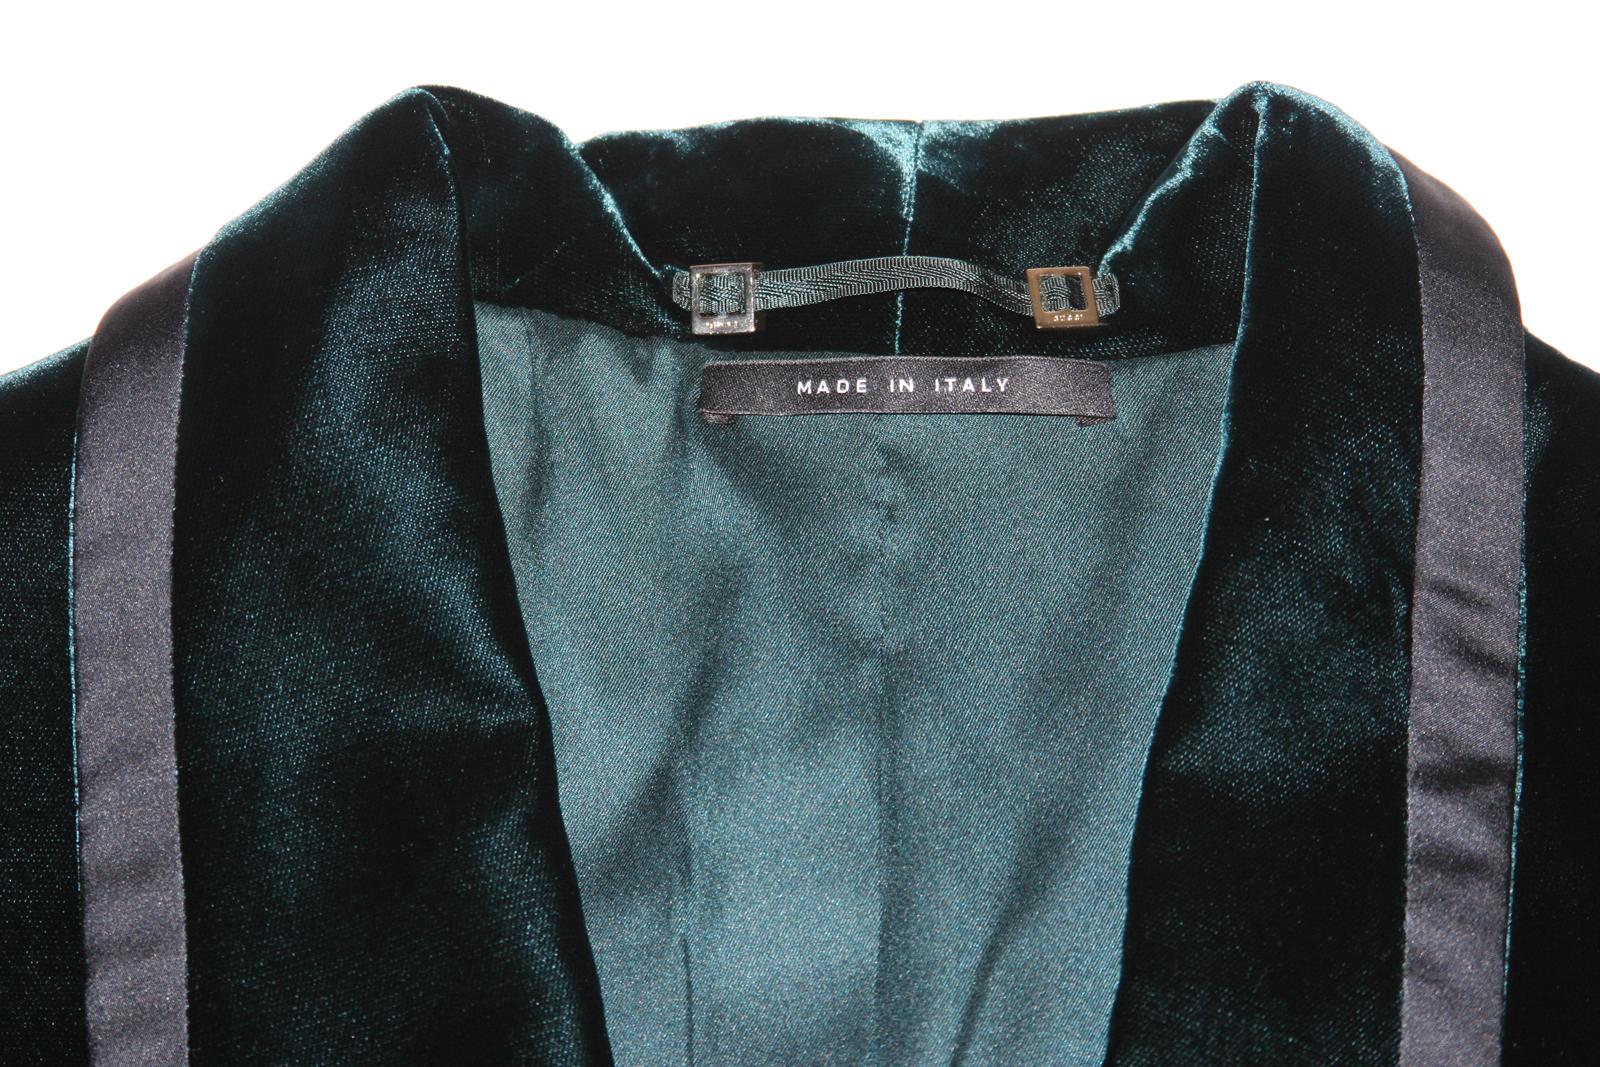 Tom Ford for Gucci F/W 2004 Runway Velvet Emerald Green Tuxedo Jacket 38 and 40 In Excellent Condition For Sale In Montgomery, TX